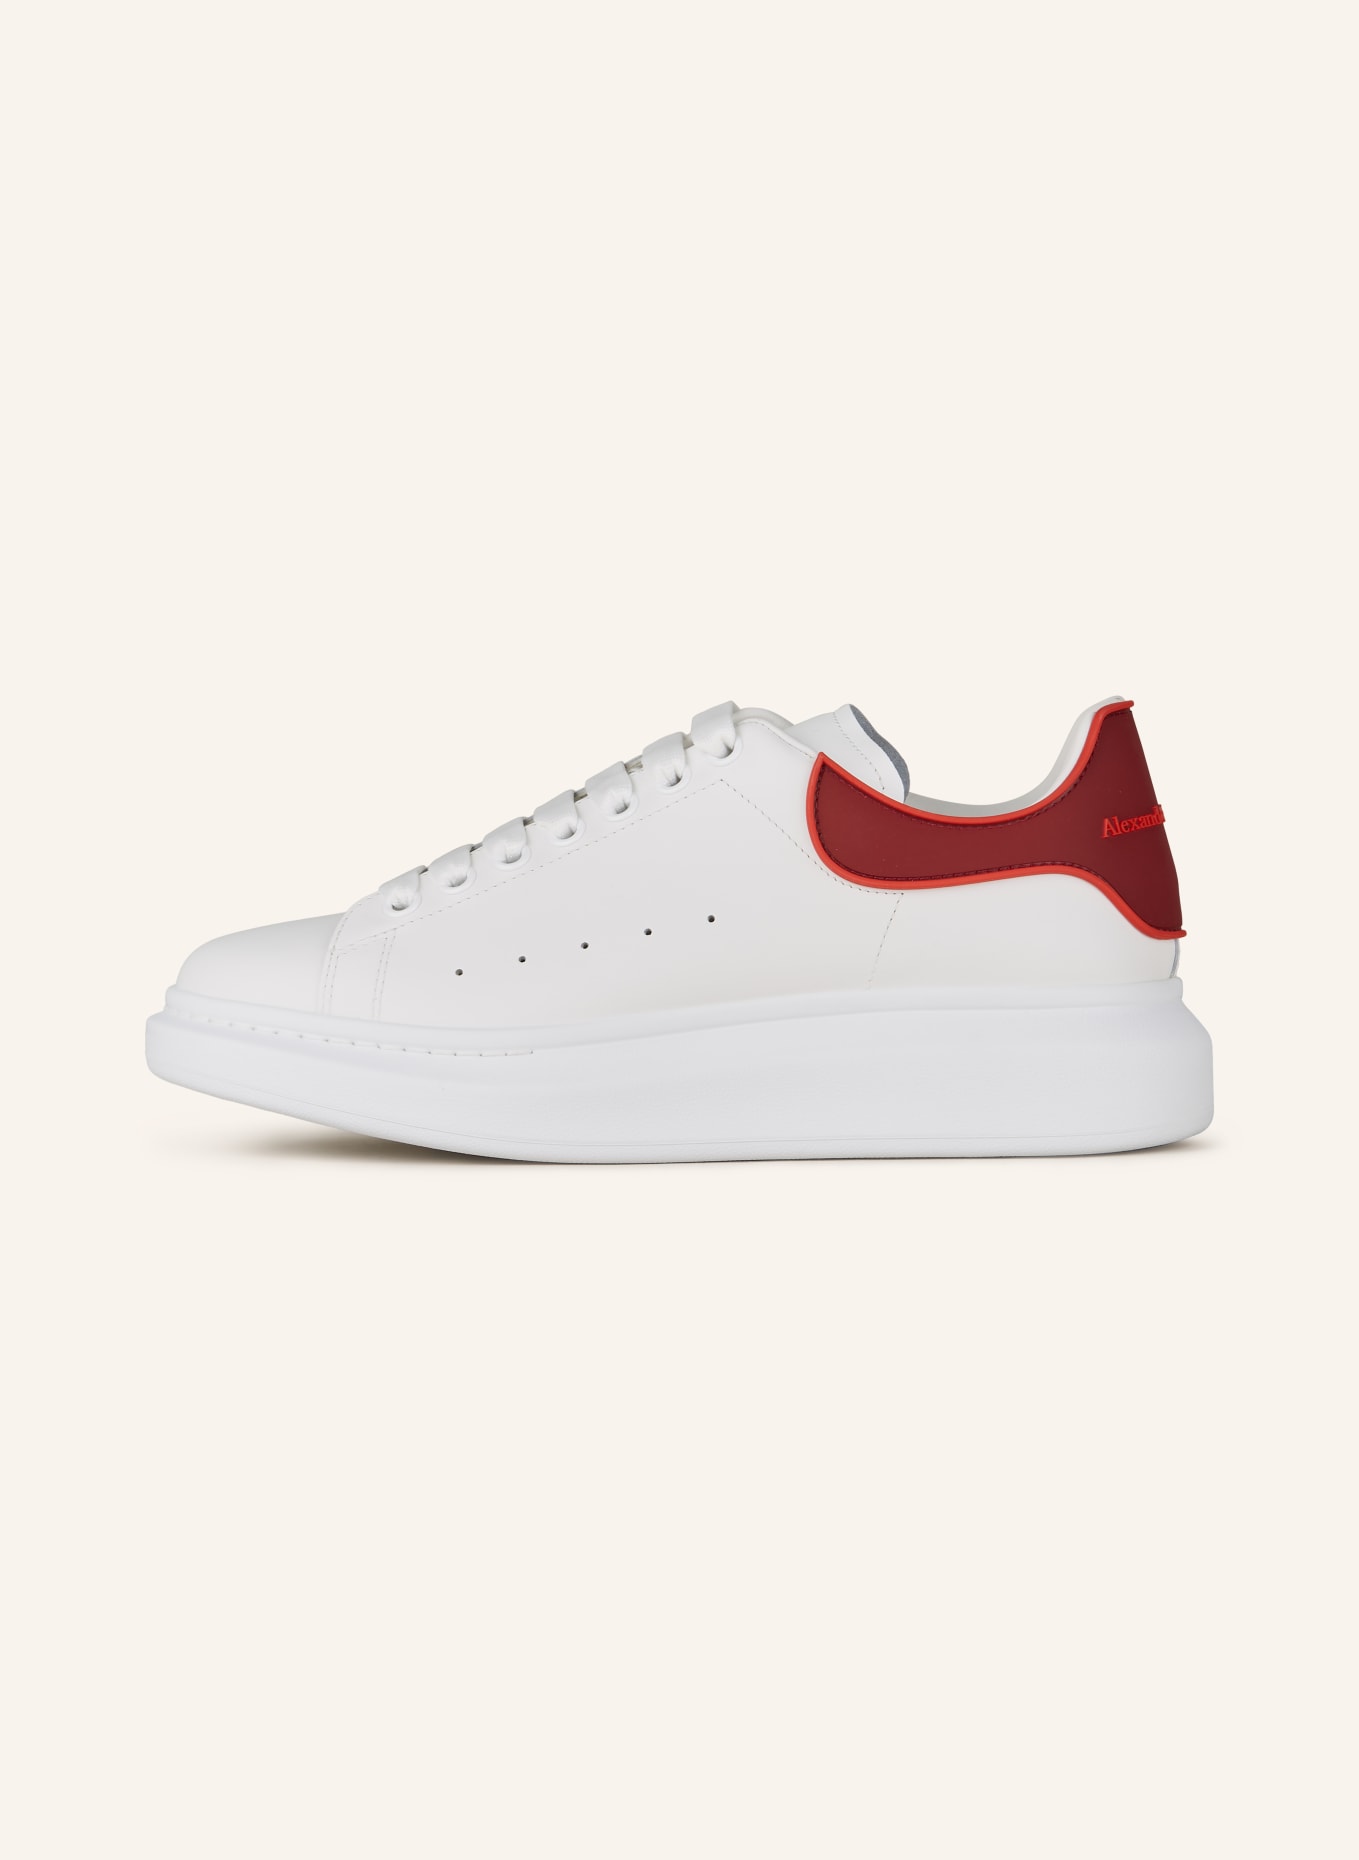 Alexander Mcqueen Exaggerated-sole Leather Sneakers White/red | ONU